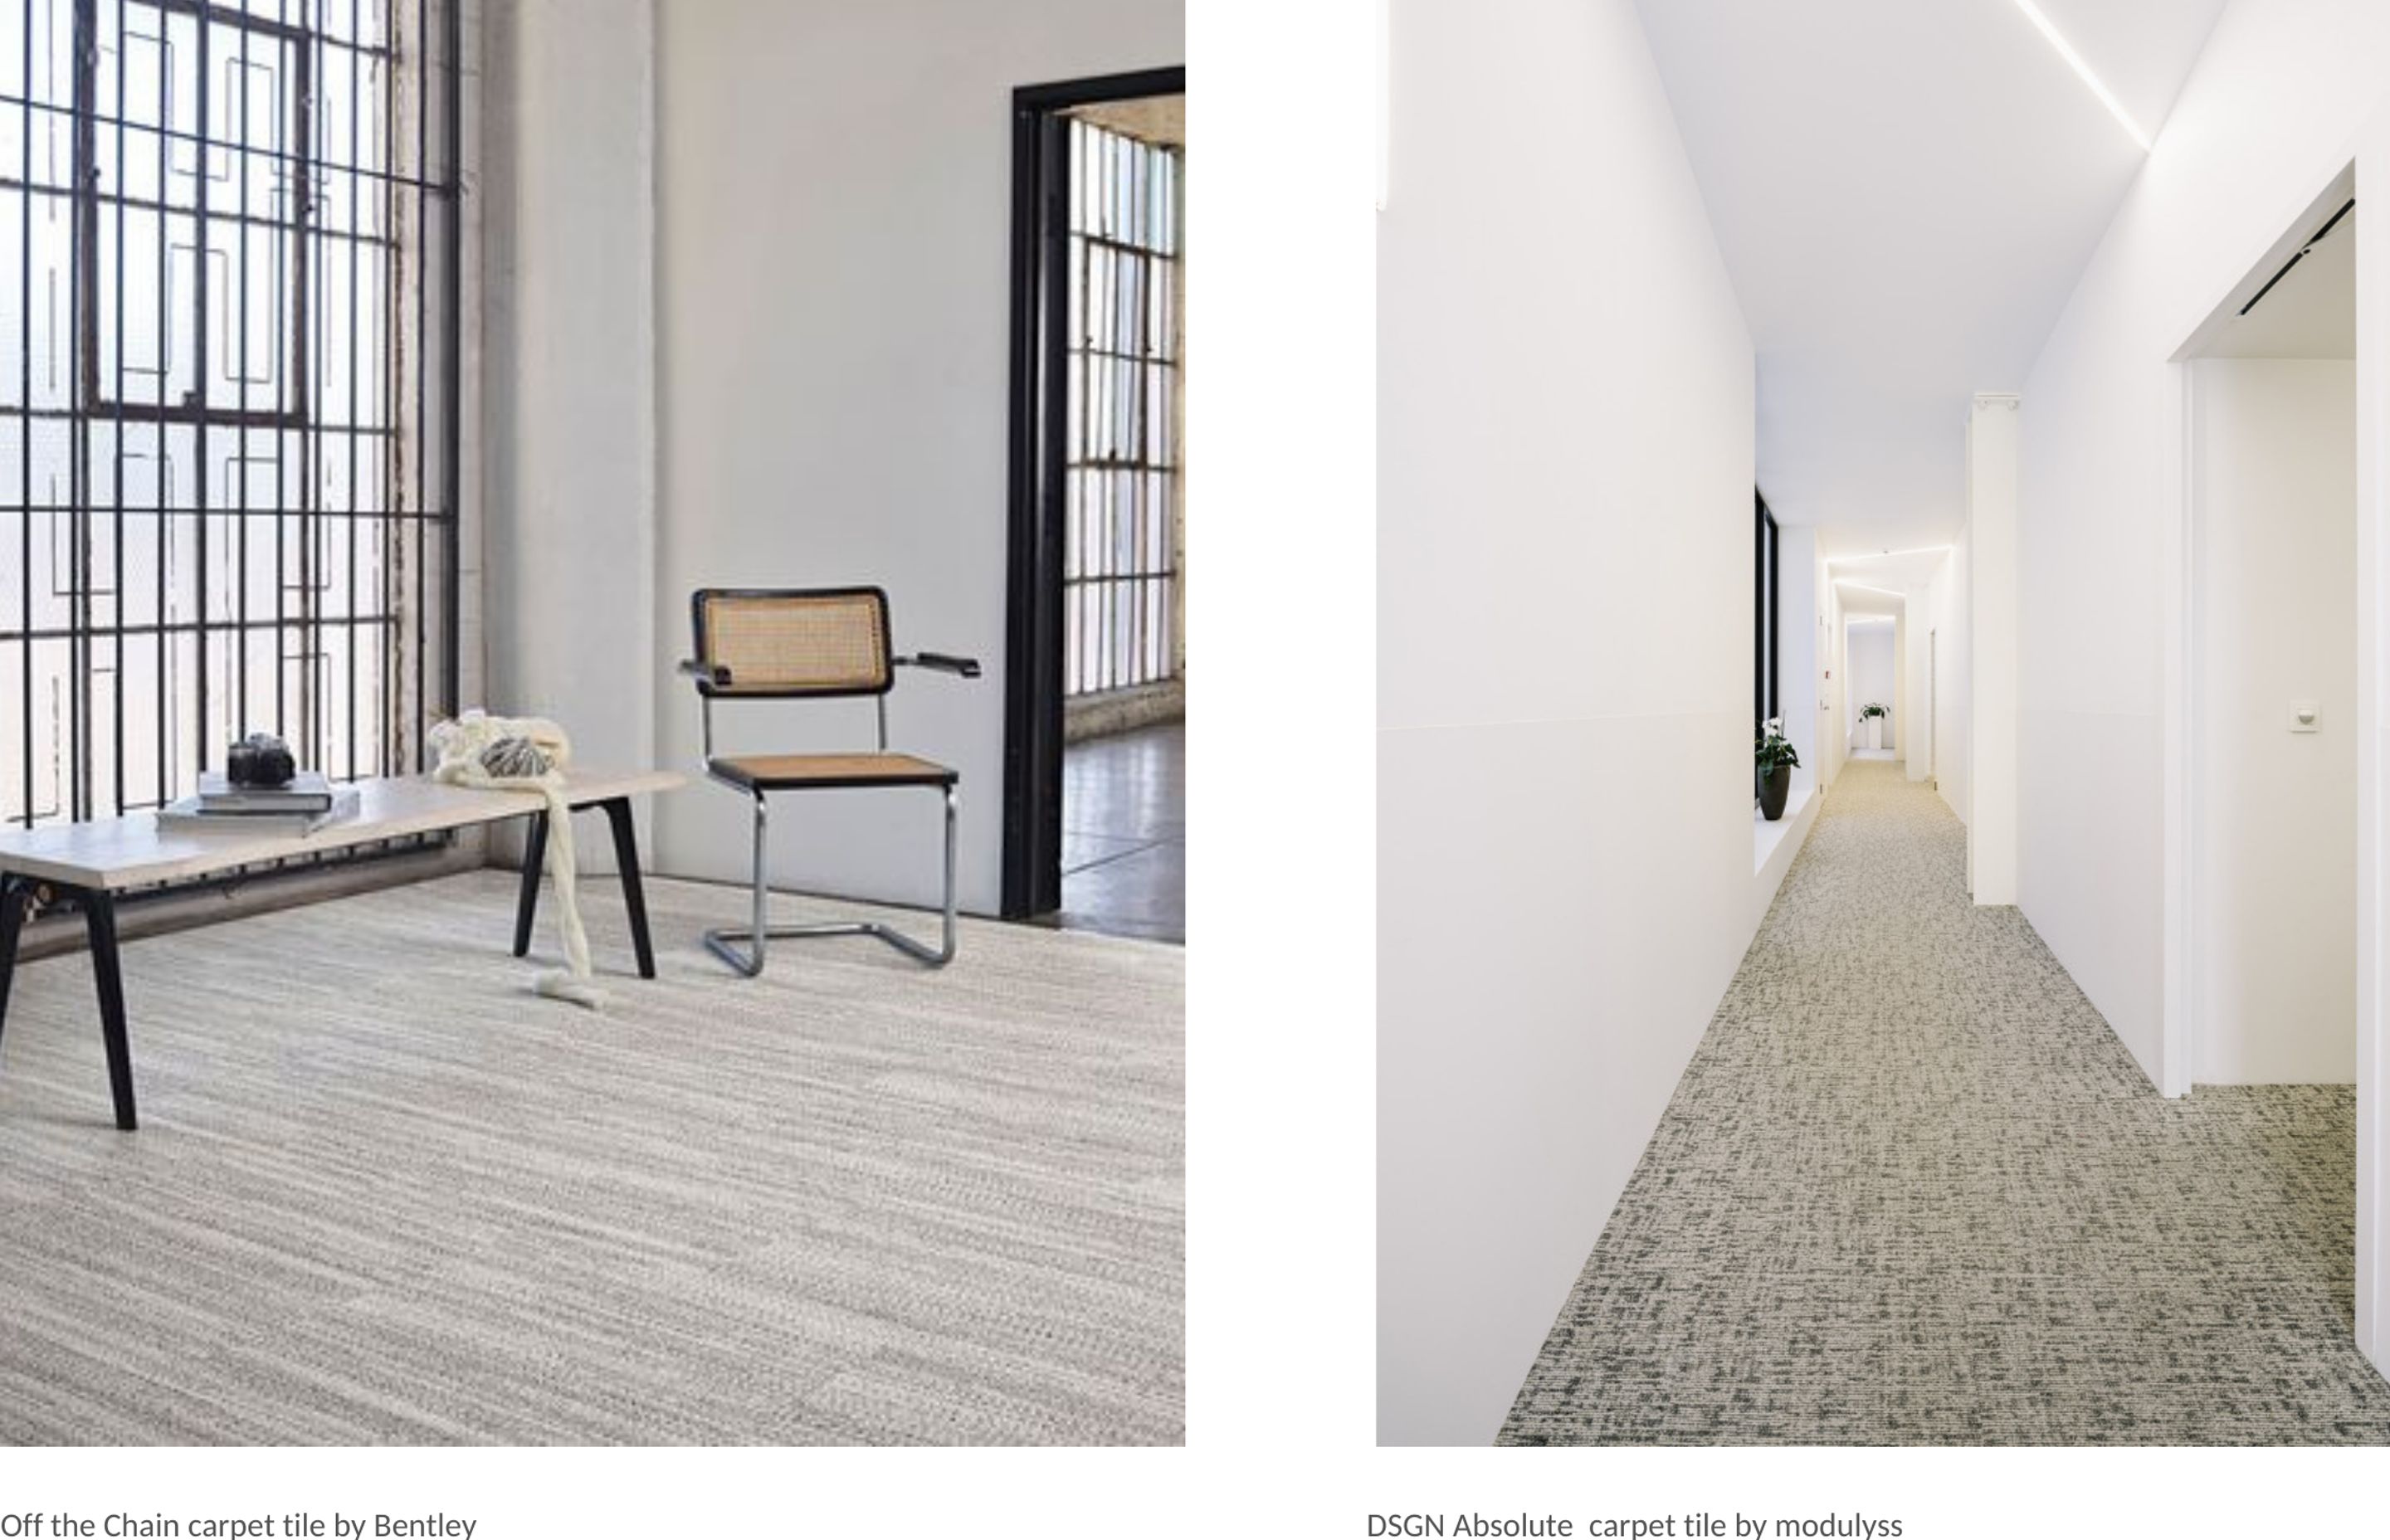 Carpets for Multi-Resi and Hotel: luxury, beauty and resilience meet sustainability at Heritage Carpets.